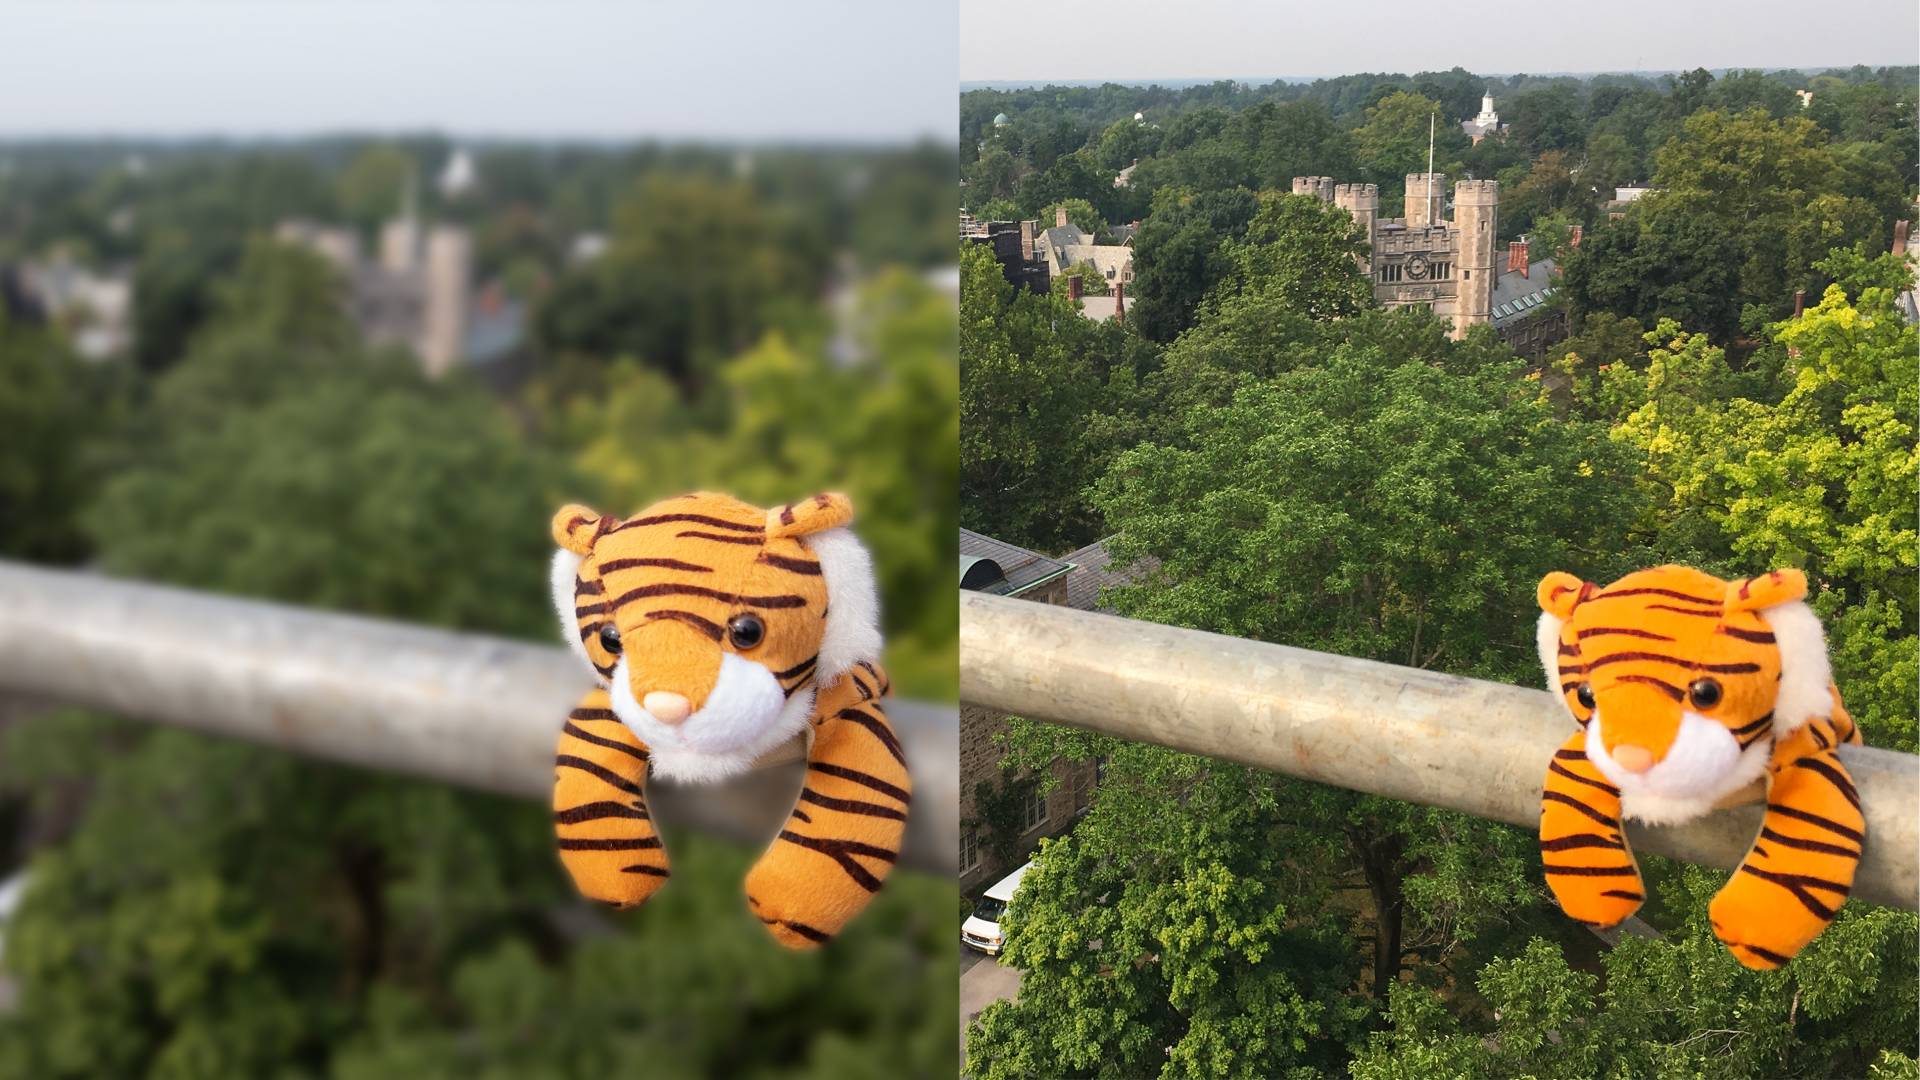 Two images side-by-side: An image of a stuffed tiger on a railing with a blurred campus in the background and an image of the same stuffed tiger with an unblurred campus in the background